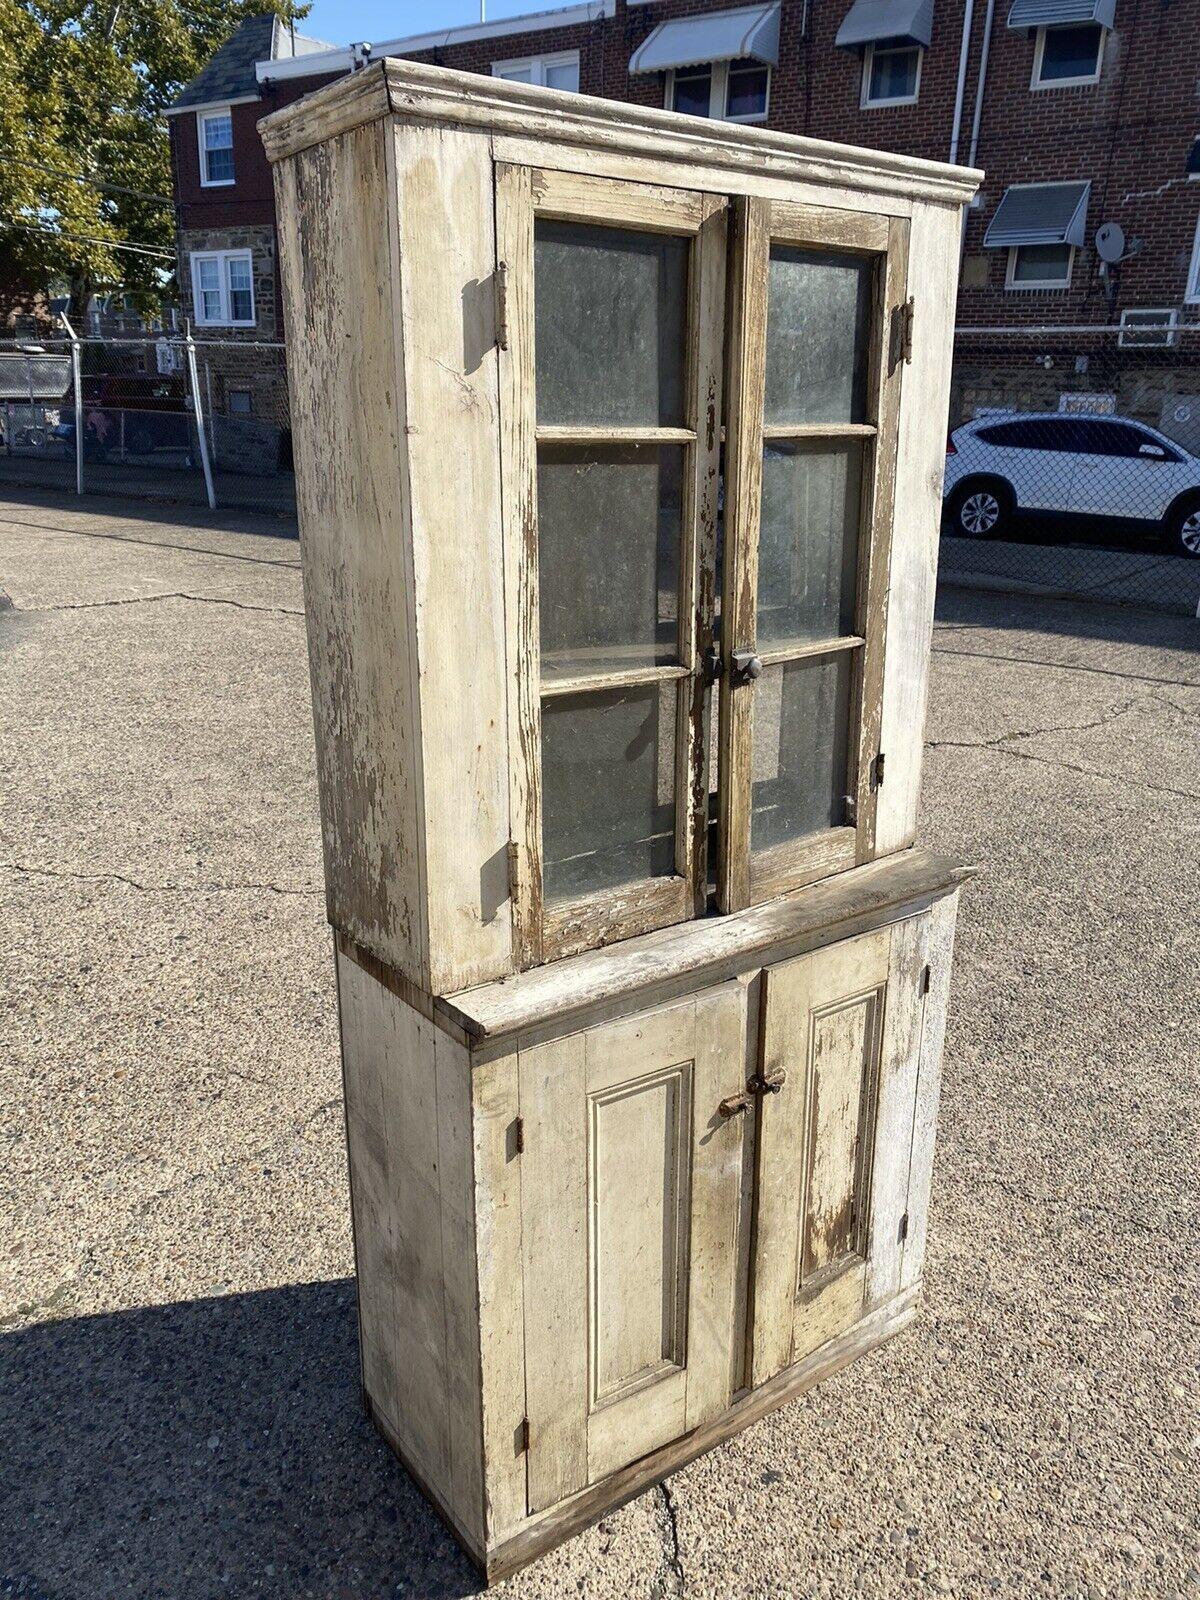 Antique American primitive country white distress painted pantry cupboard hutch cabinet. Item features 6 individual panes of glass to doors. Solid wood construction, distressed finish, 2 part construction, 2 wooden shelves. Circa 19th century.